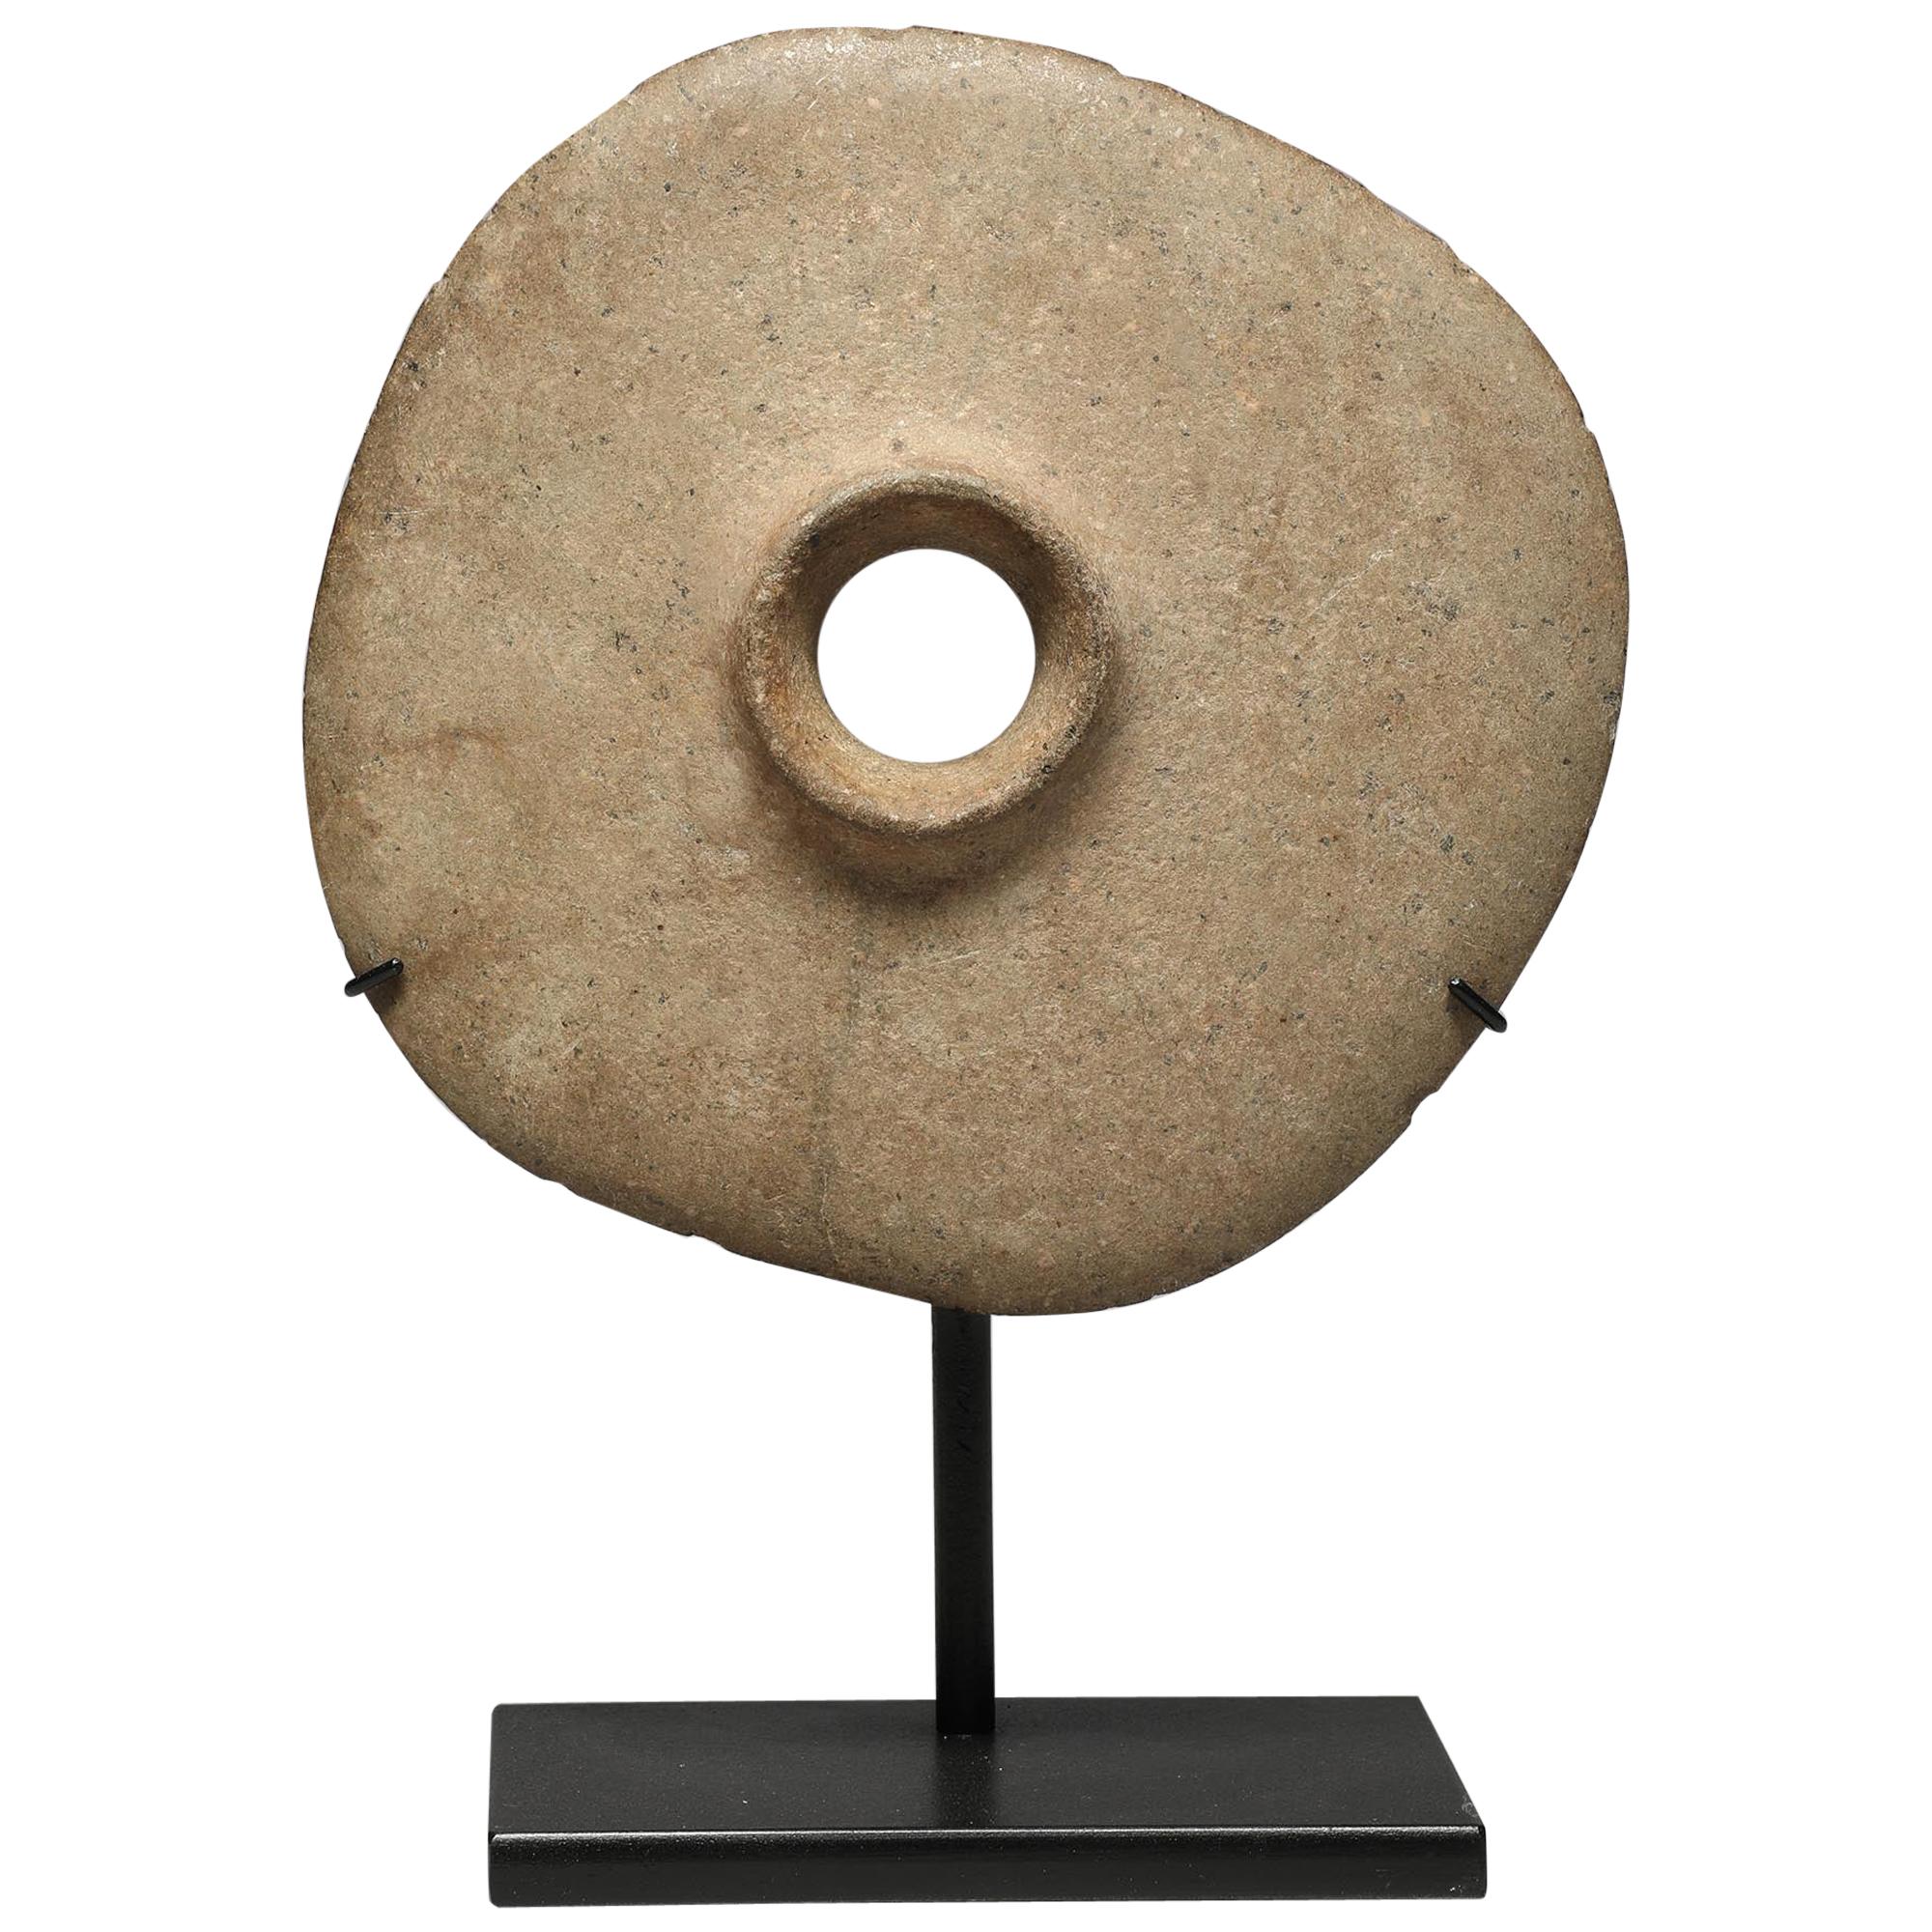 Pre-Contact New Guinea Large Ground Stone Disc Mace Head Neolithic Modern Form For Sale